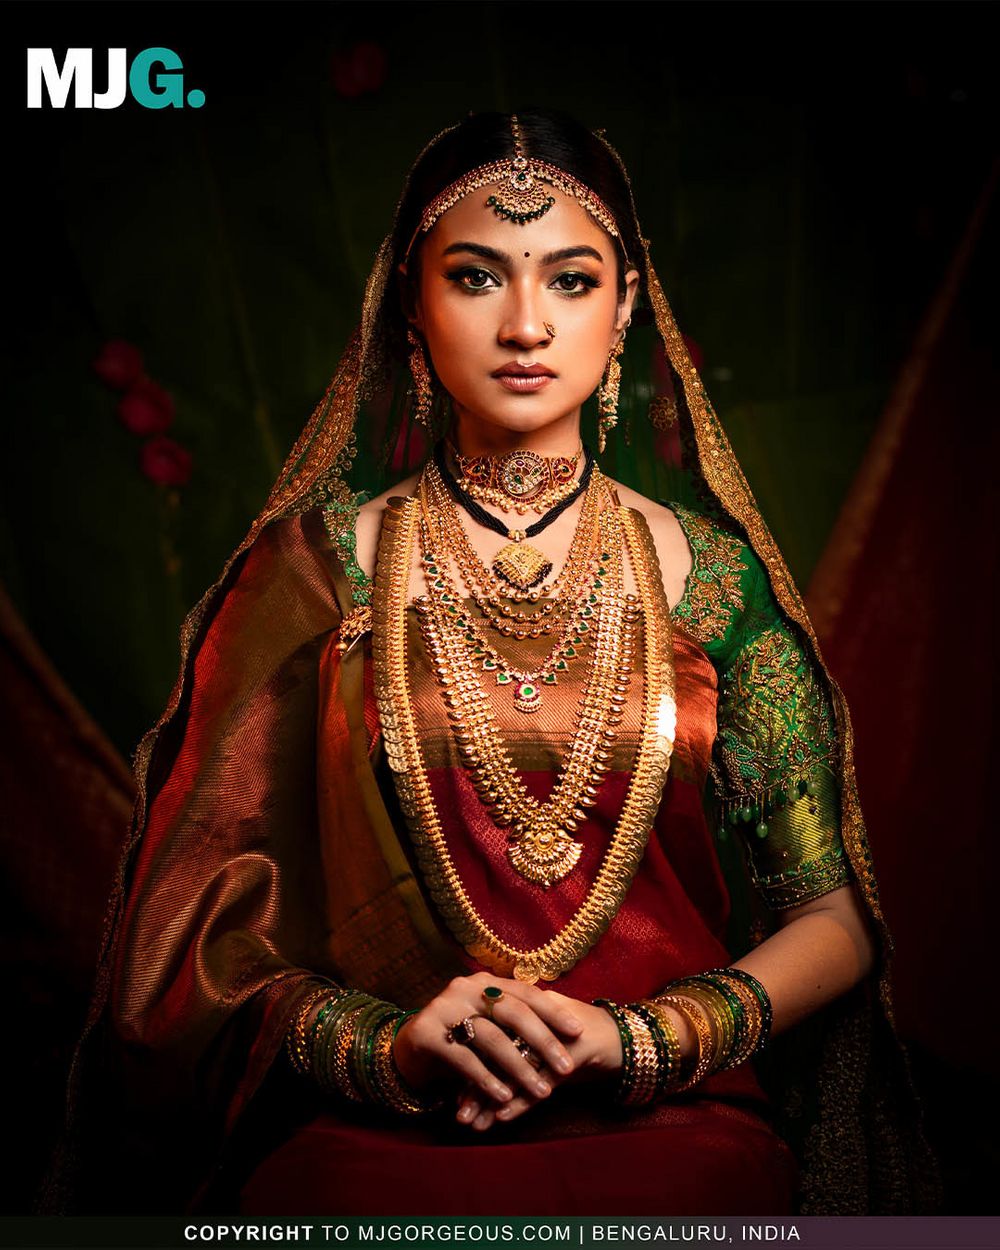 Photo From South Indian Brides - By MJ Gorgeous Makeup & Academy